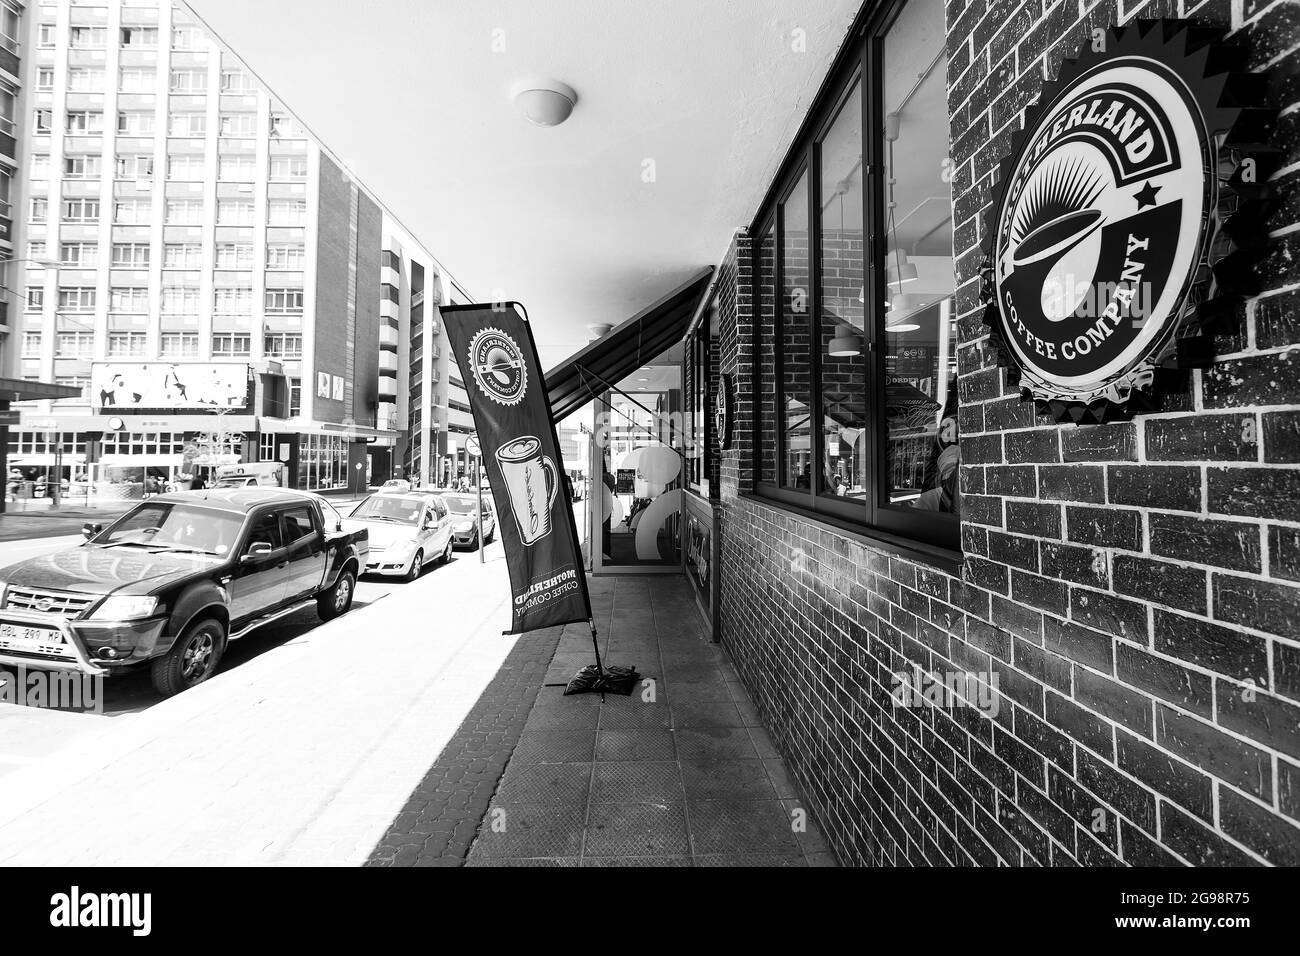 JOHANNESBURG, SOUTH AFRICA - Jan 06, 2021: The exterior walls of a retro coffee shop Stock Photo